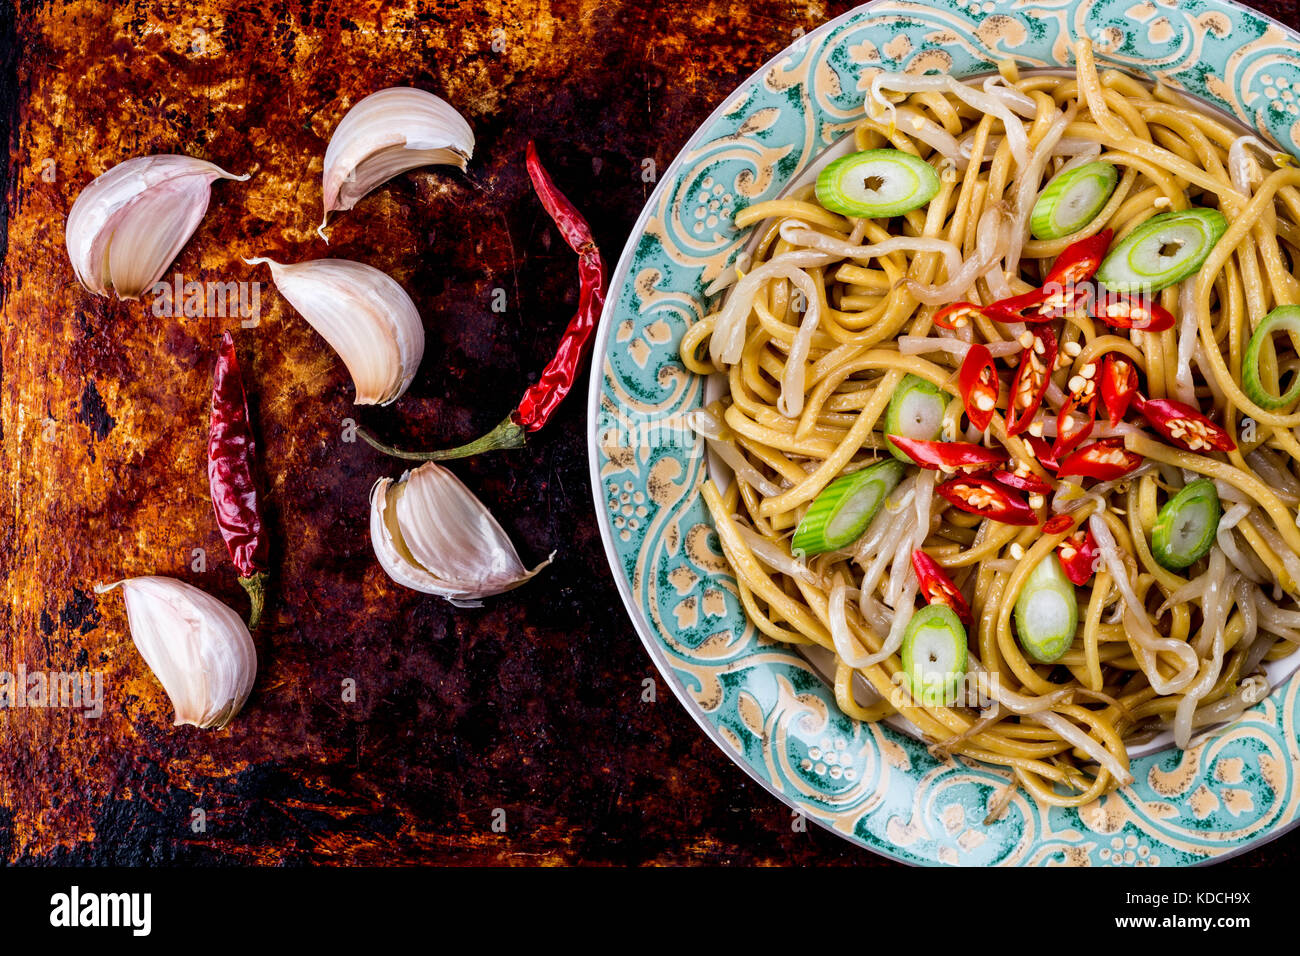 Chinese Style Wok Stir Fried Egg Noodles with Beansprouts and Red Chilli On A Distressed Oven or Baking Tray Stock Photo